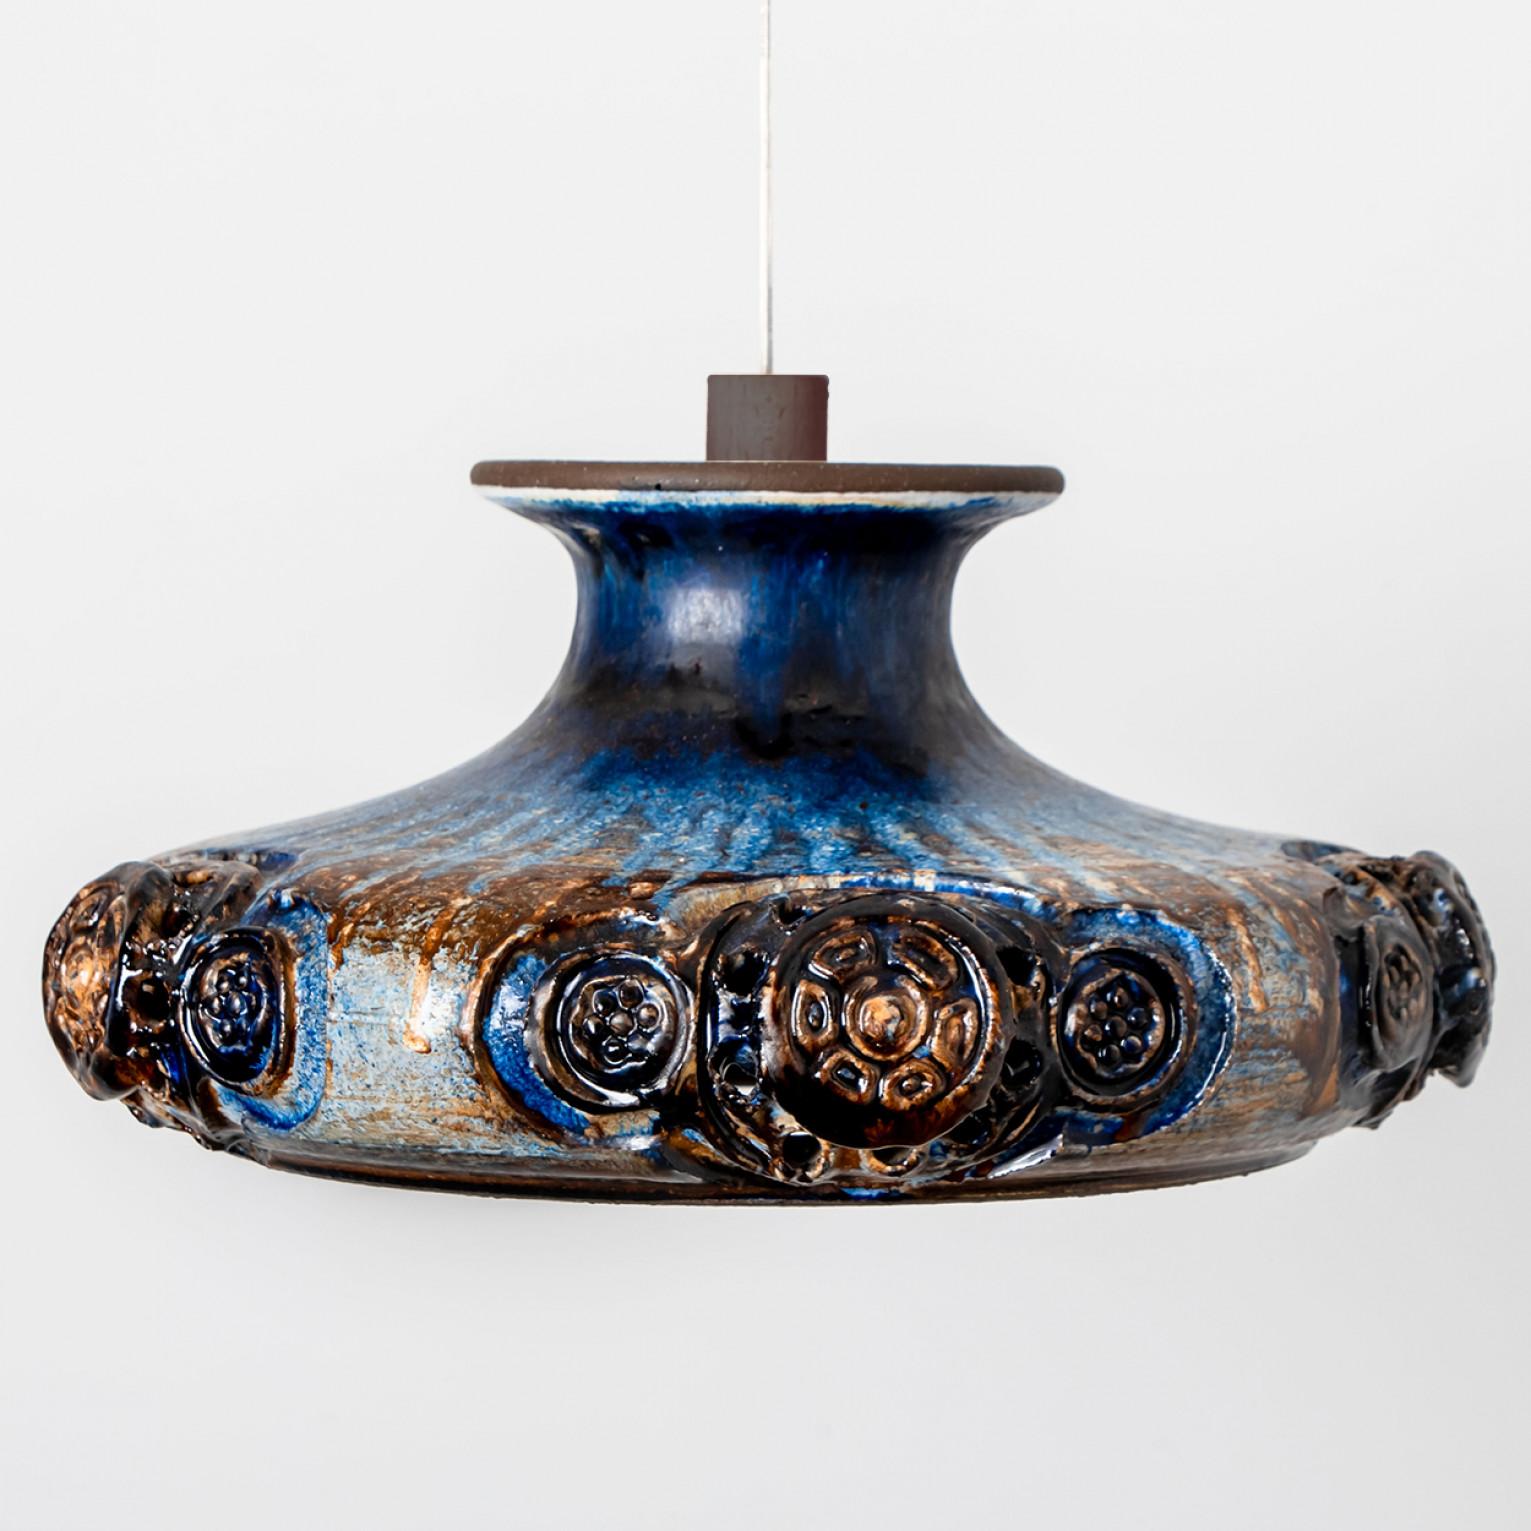 Stunning round hanging lamp with an unusual shape, made with rich cobalt colored blue ceramics, manufactured in the 1970s in Denmark. We also have a multitude of unique colored ceramic light sets and arrangements, all available on the website. All